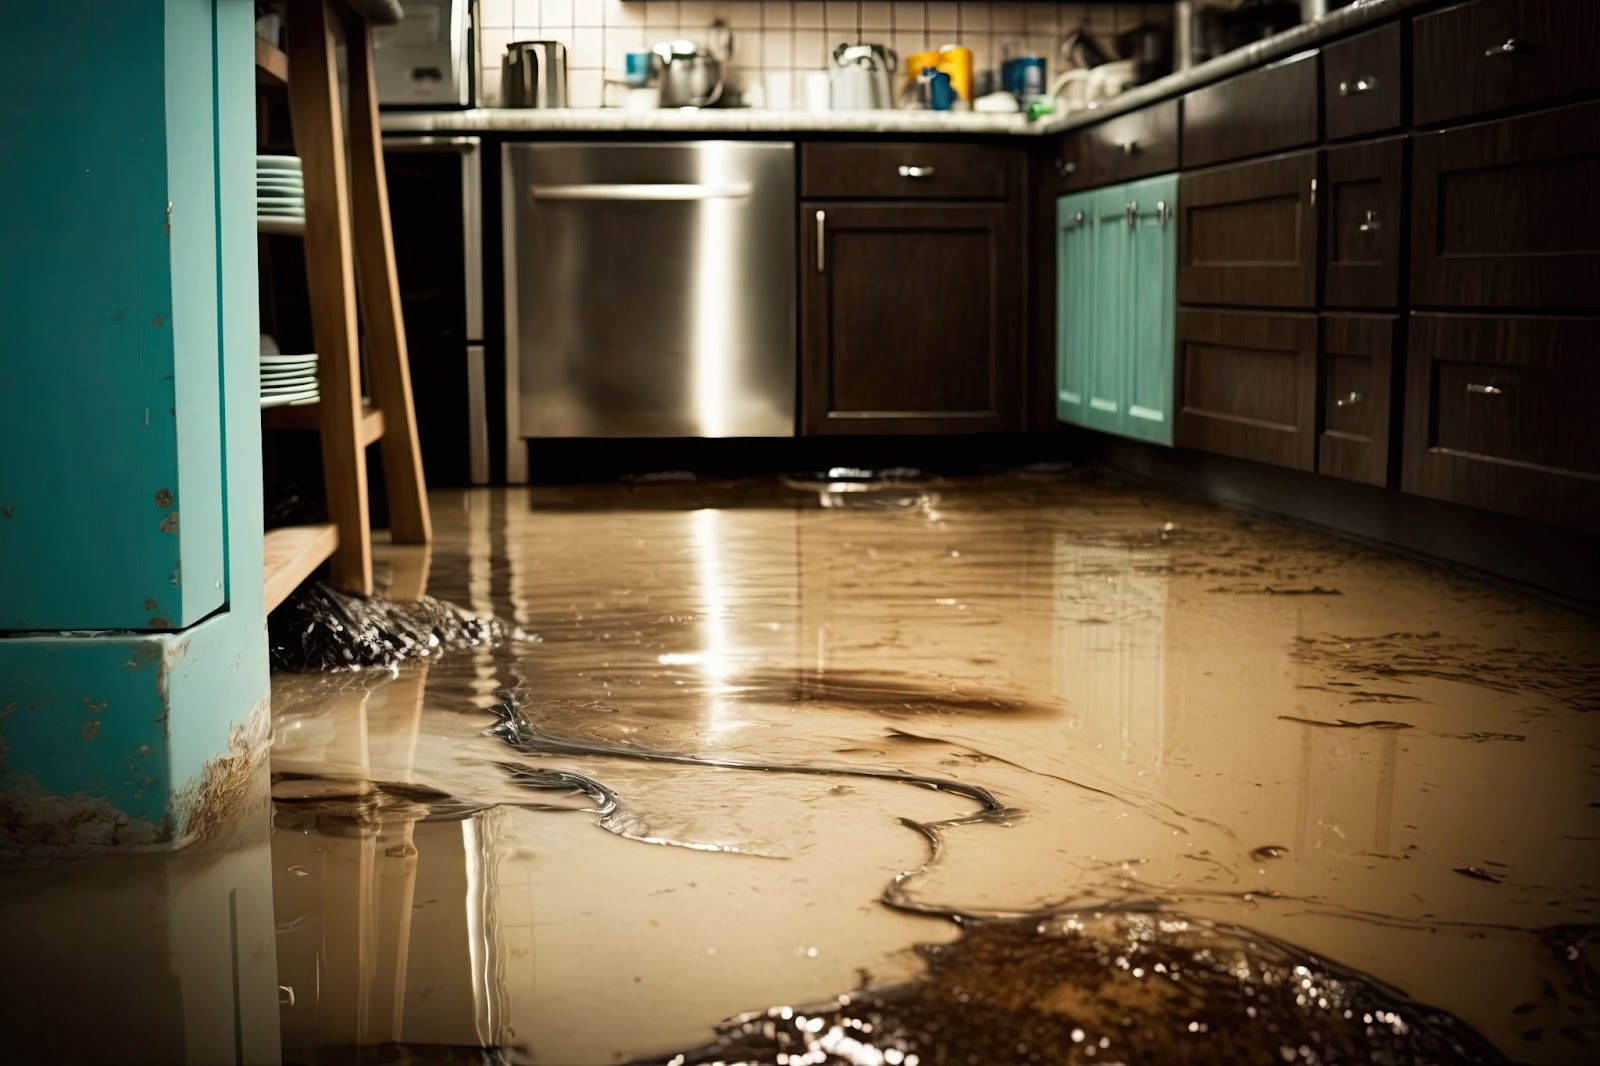 Dirty floor and sink in need of professional water damage restoration